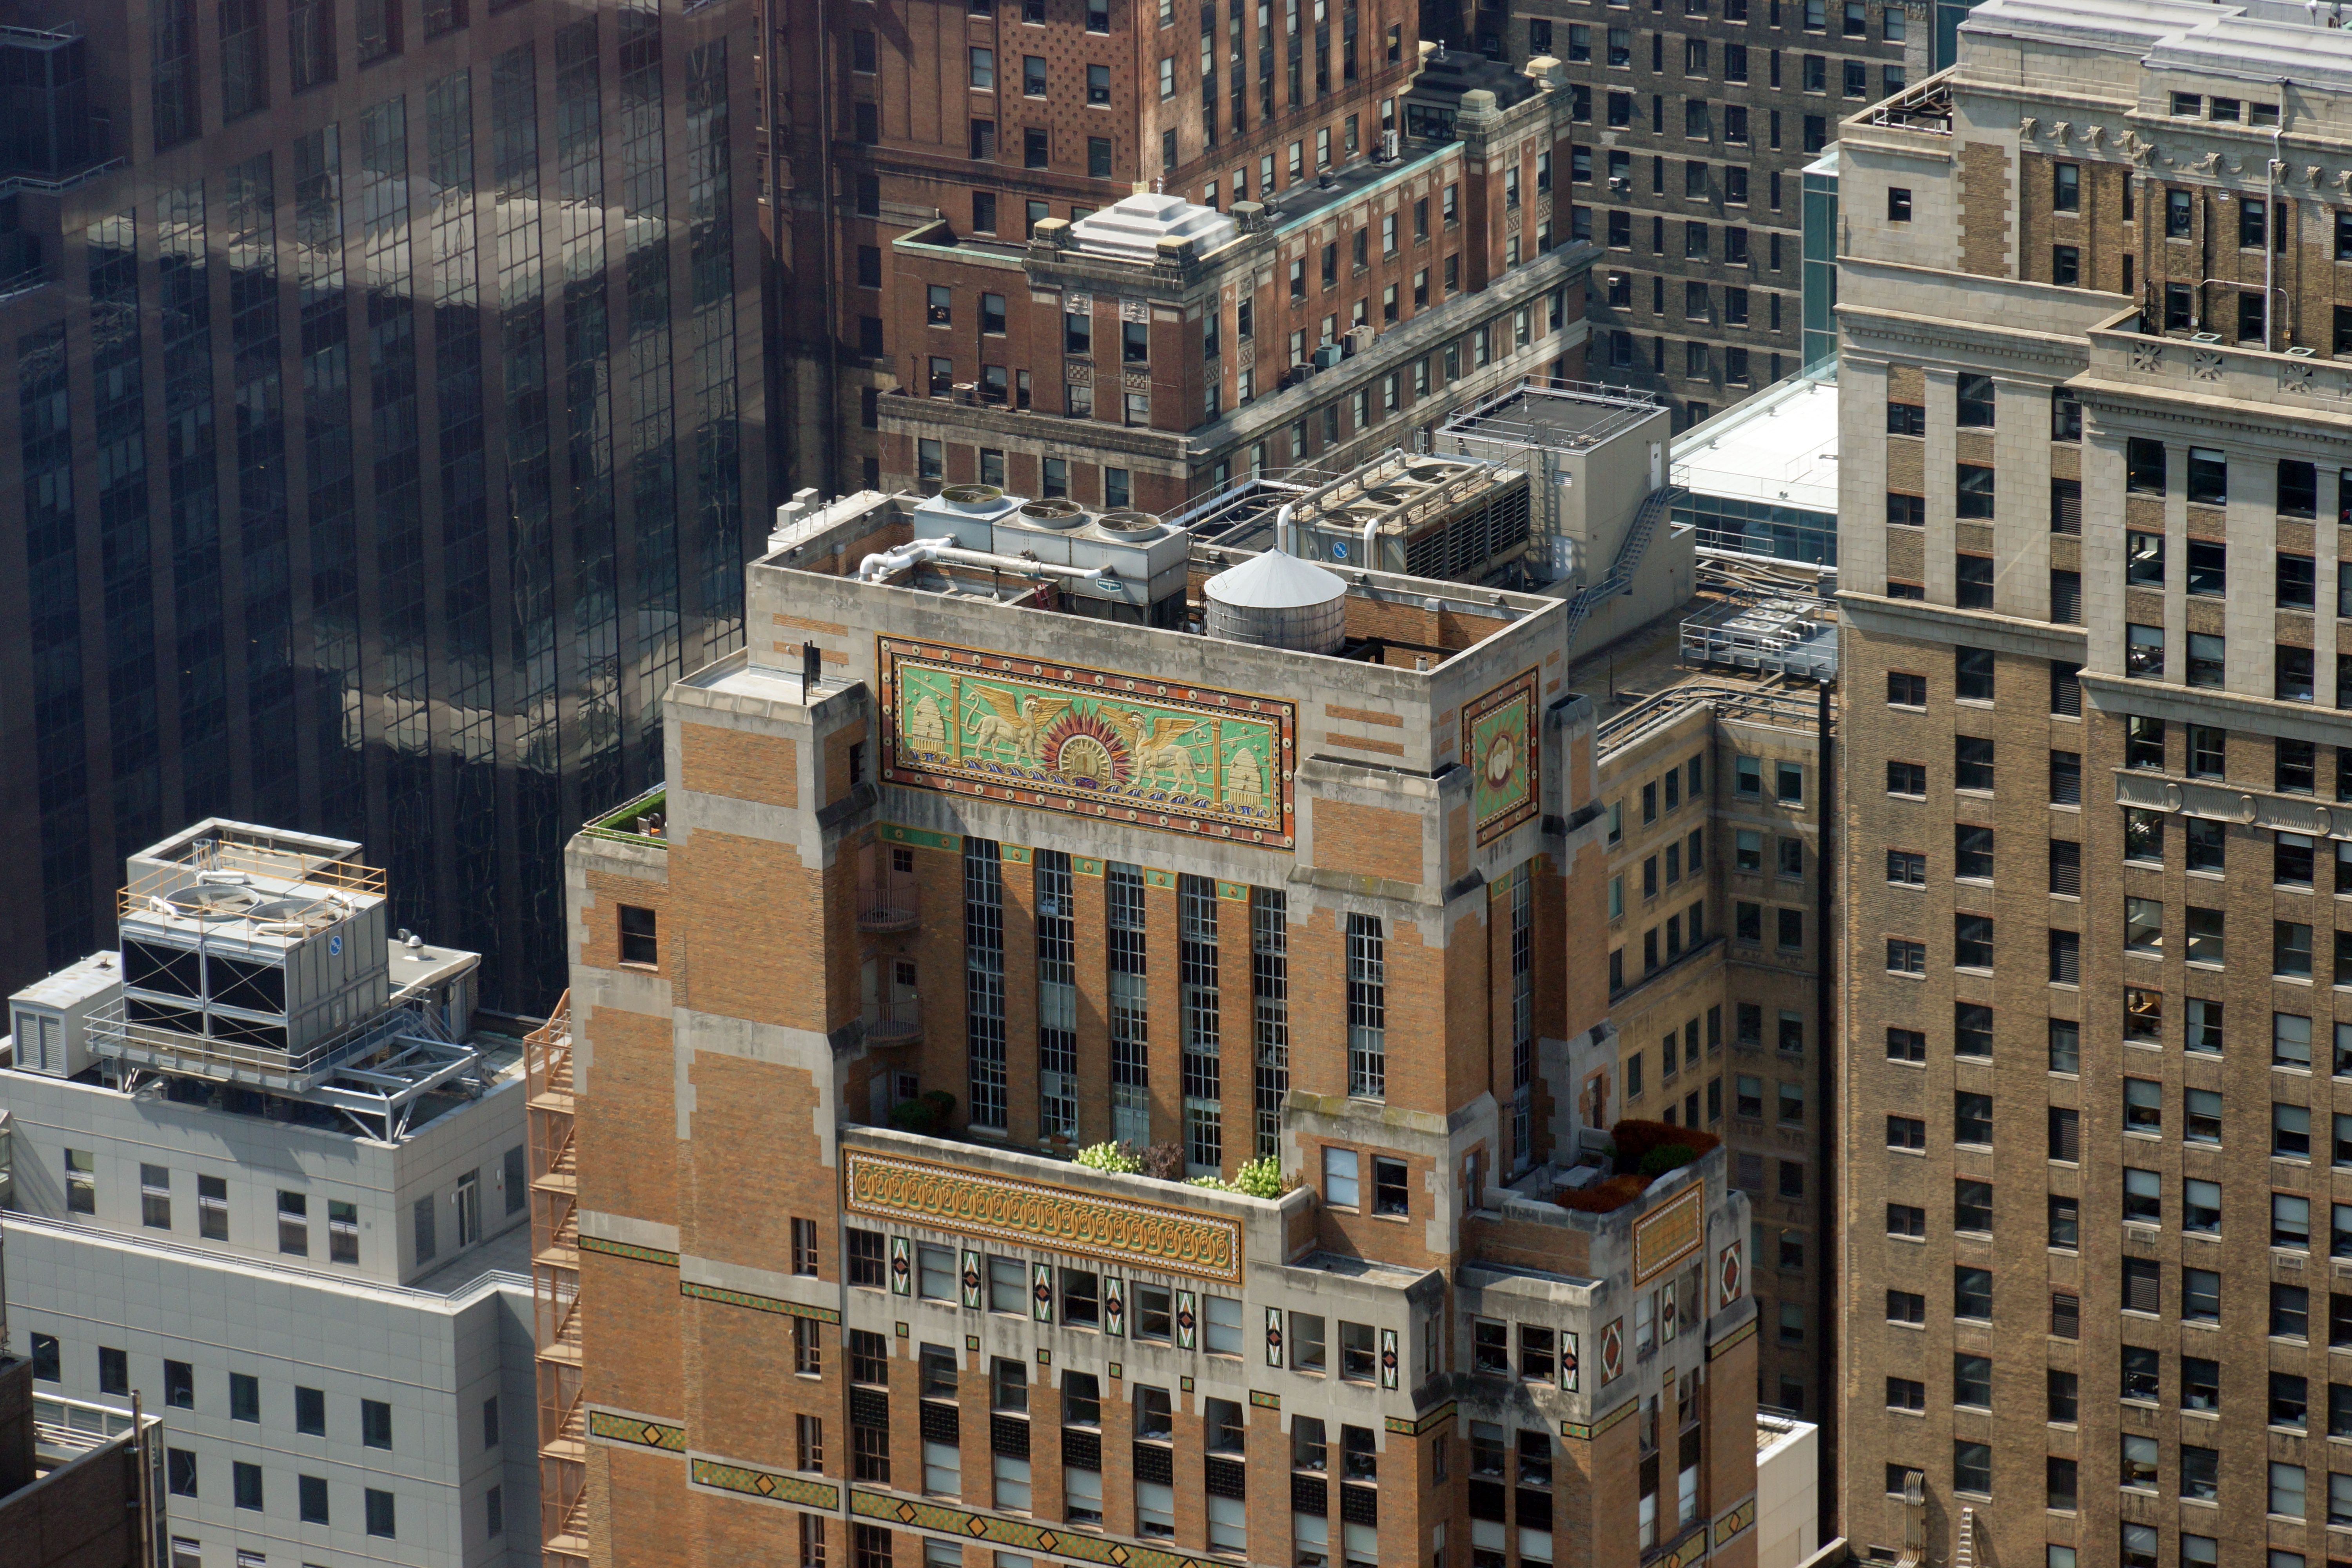 File:Fred F. French Building Building top detail.jpg - Wikimedia Commons